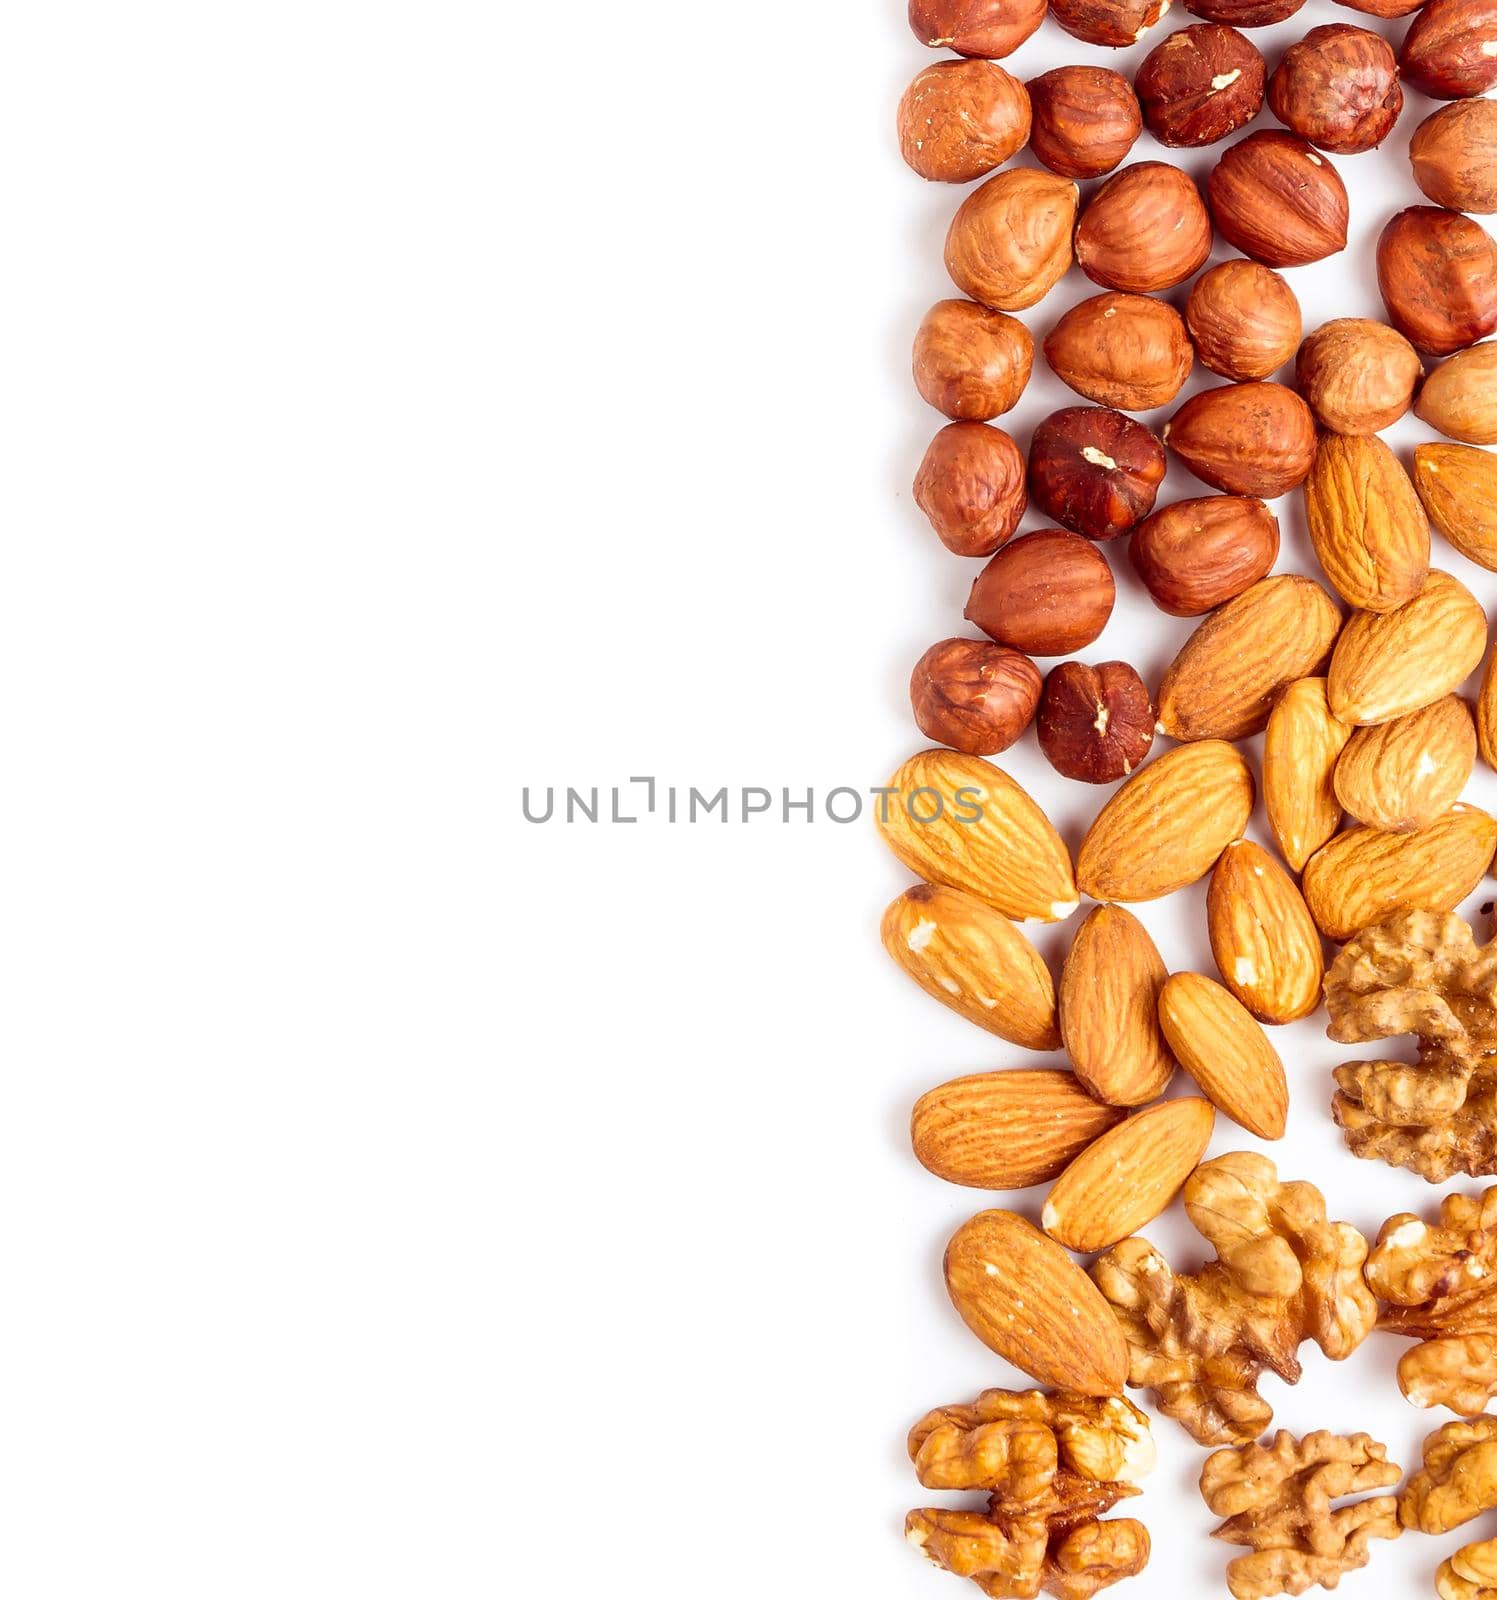 Nuts filberts isolated on white background. Space for text on the left side